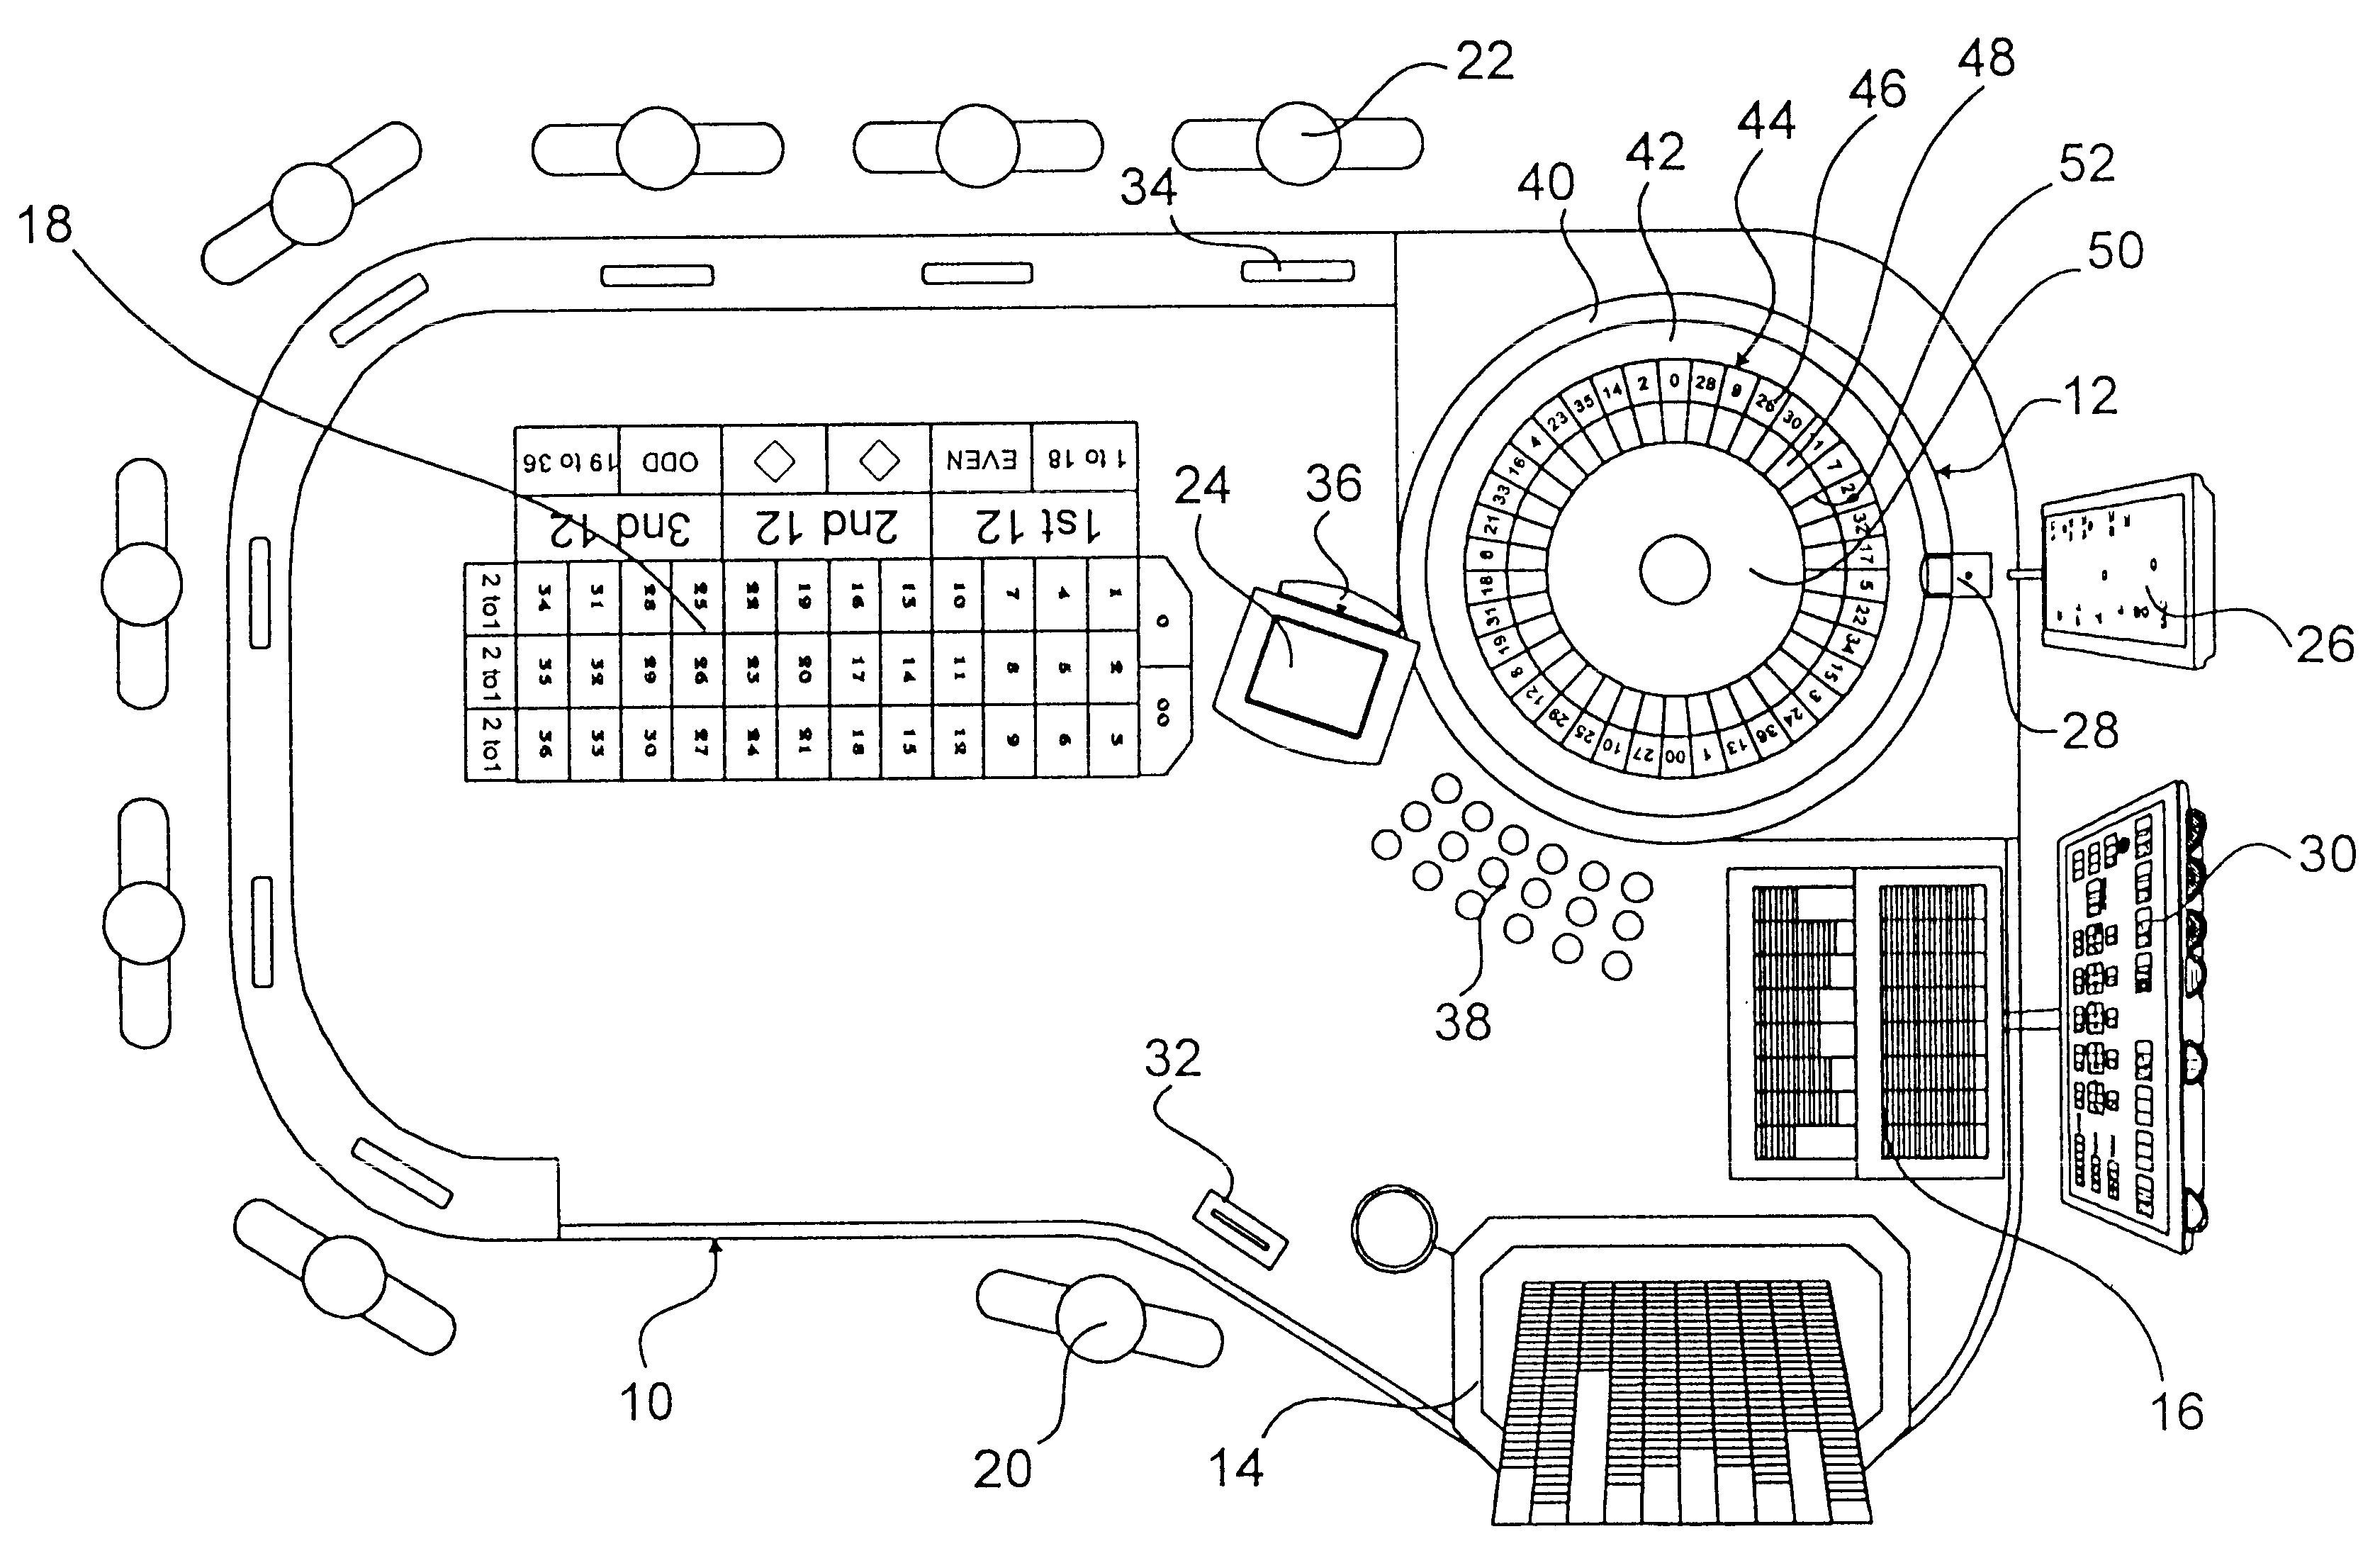 Method of estimating the performance of a croupier at a roulette table